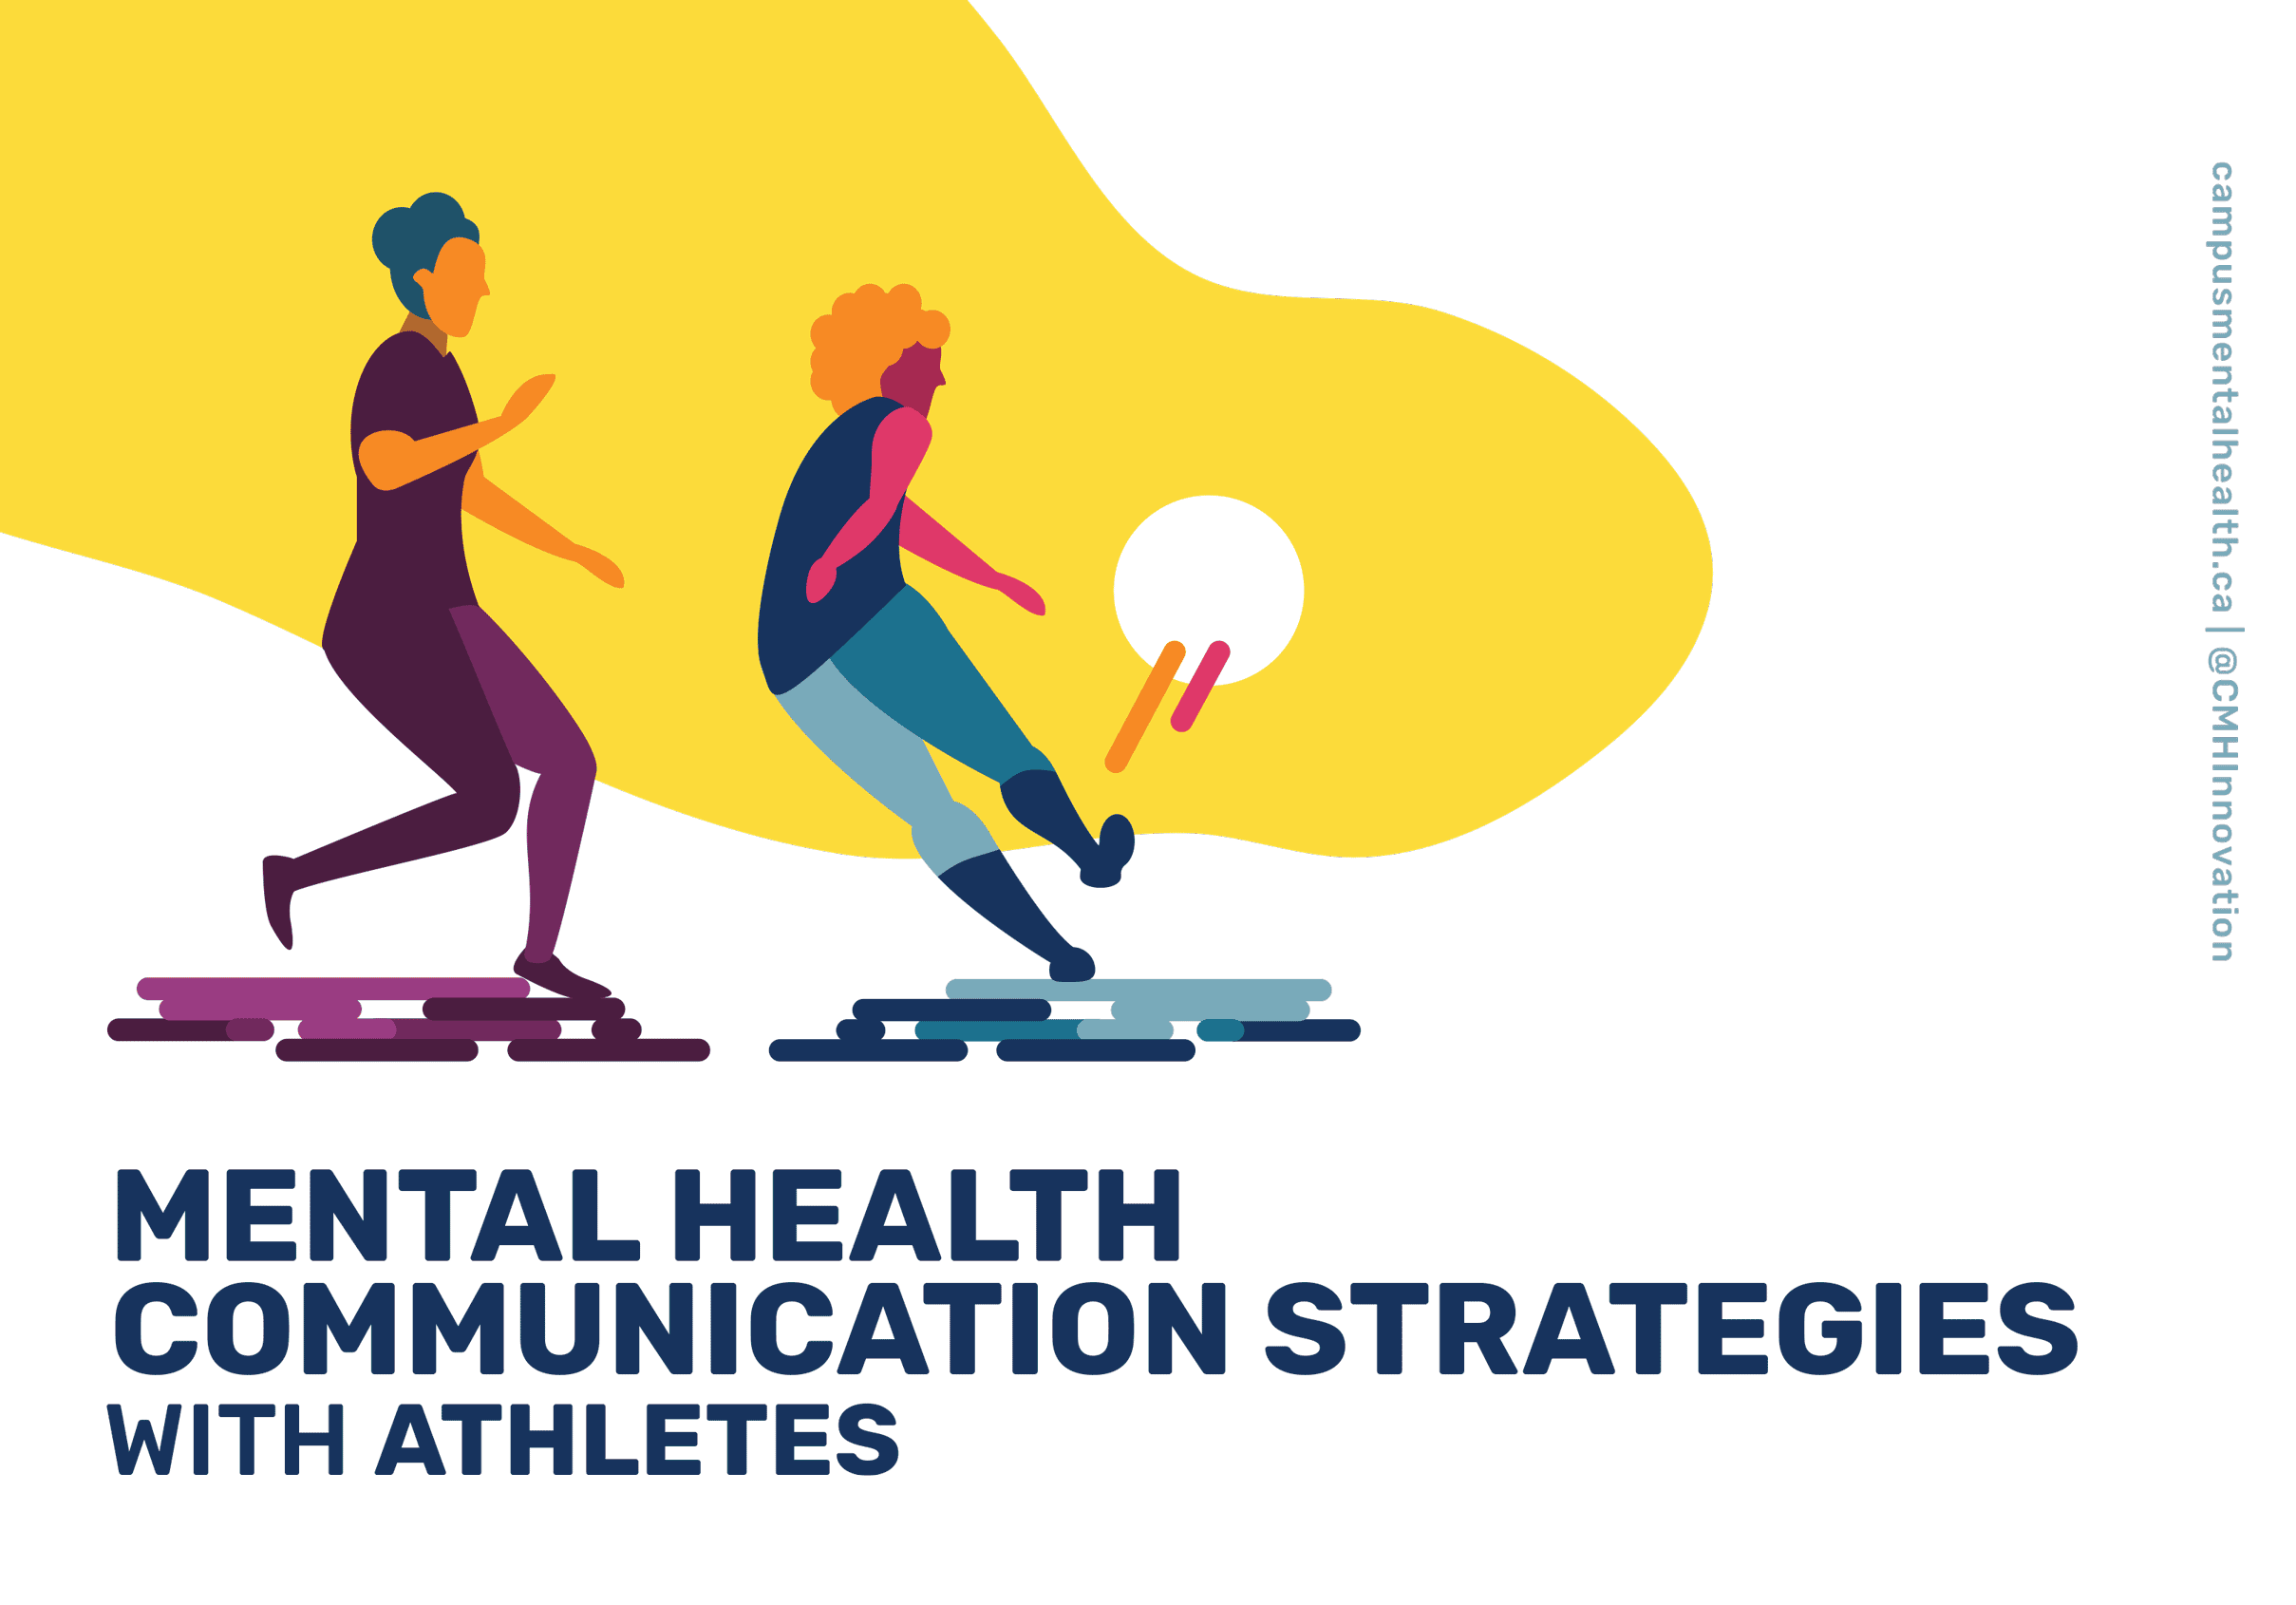 Mental Health Communication Strategies with Athletes